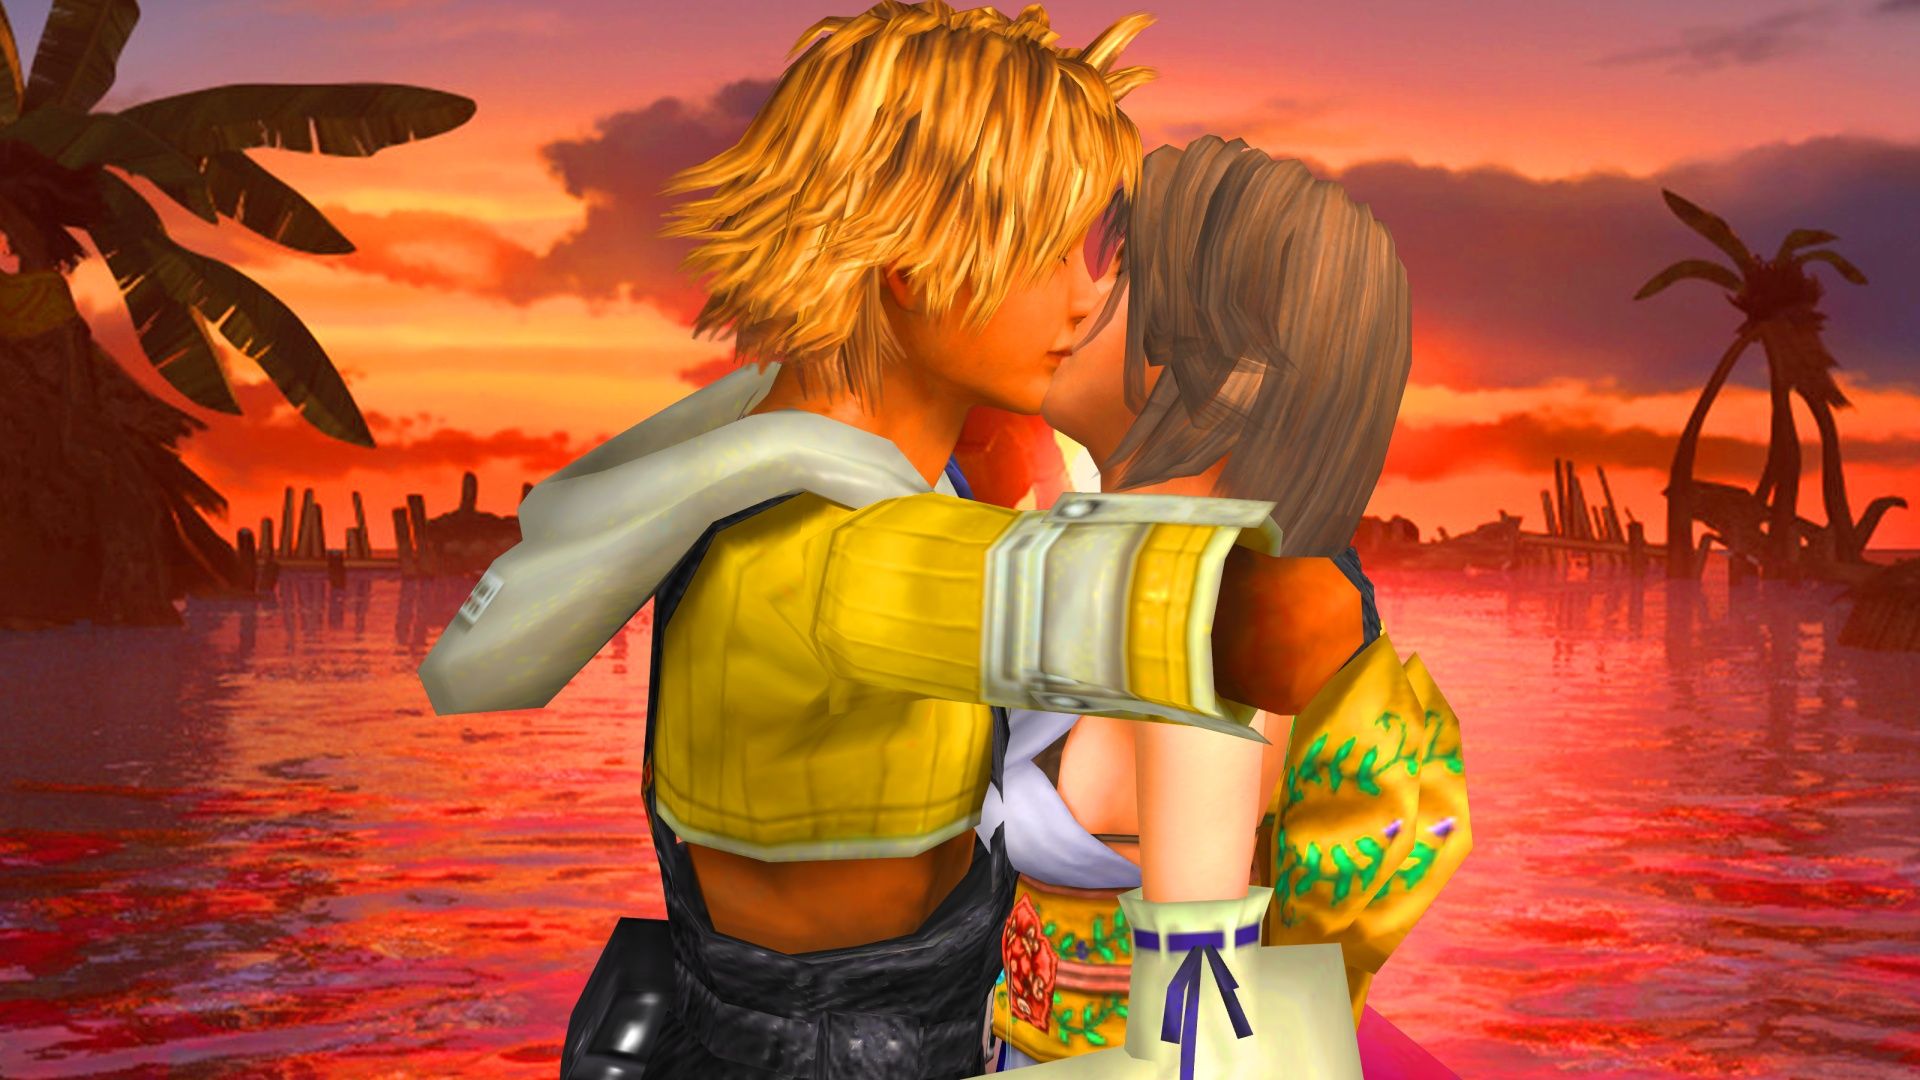 Yuna and Tidus Wallpaper by LadyLionhart on DeviantArt